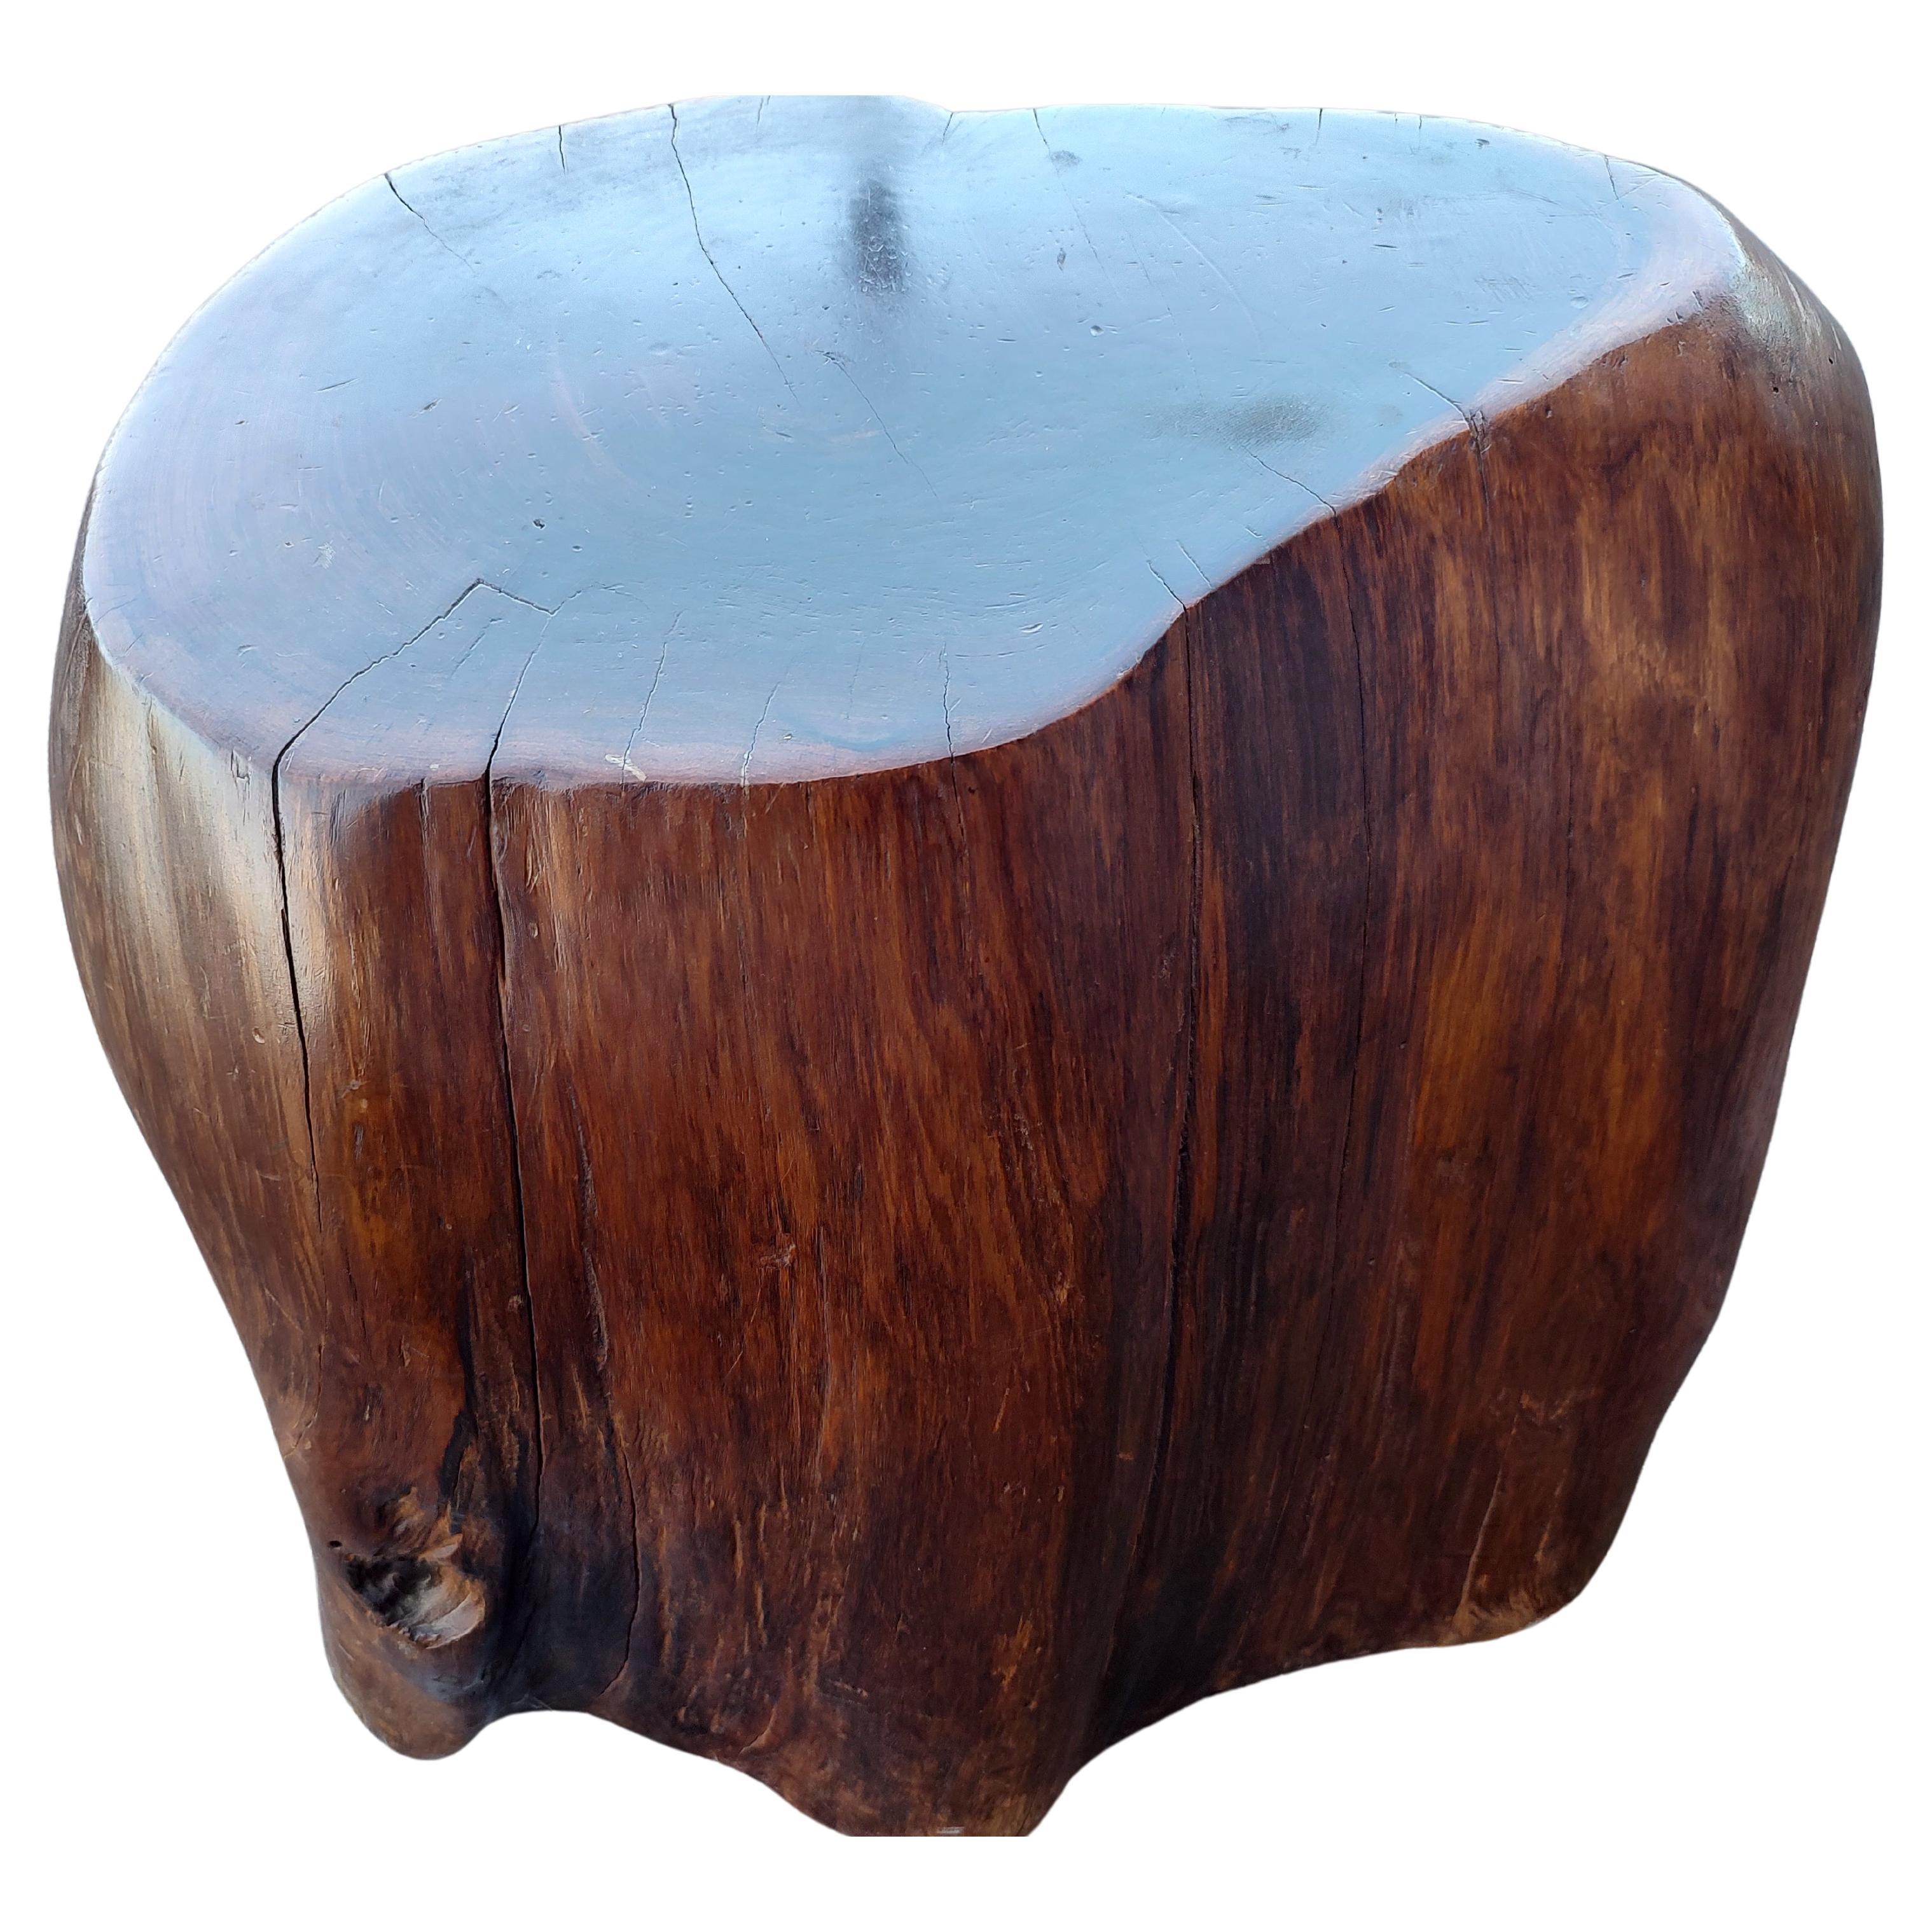 Fabulous and large Sculptural section of Redwood from California. Flat top measures 20 x 16, while the base is 24 x 24 with a height of 16. Piece of glass either round or square can be placed on top to further enhance the use and size. In excellent